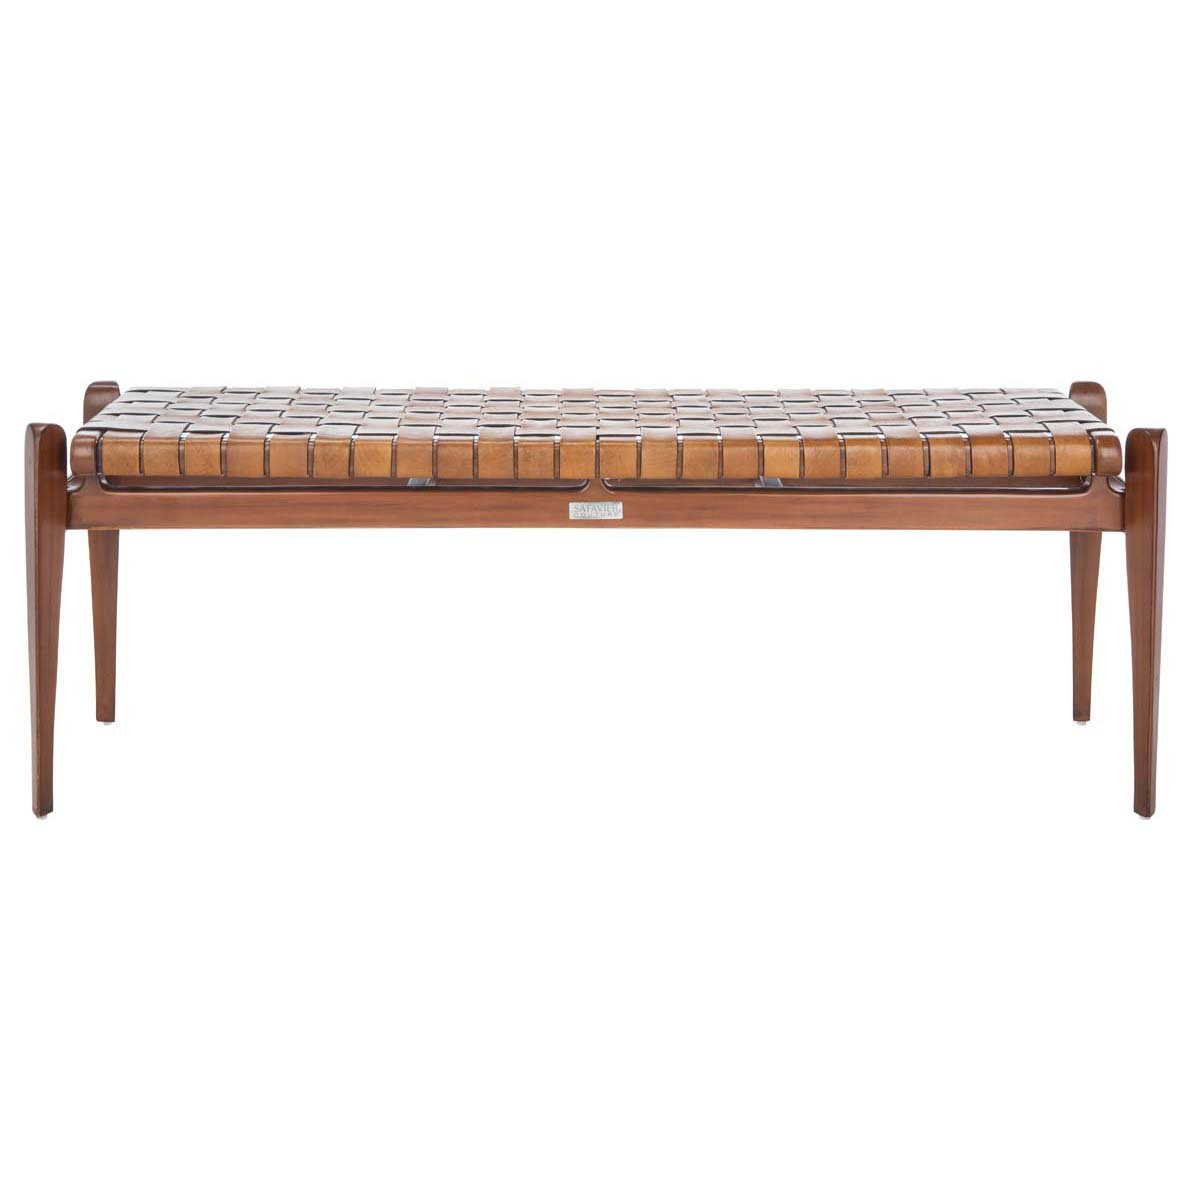 Safavieh Couture Dilan Leather Bench